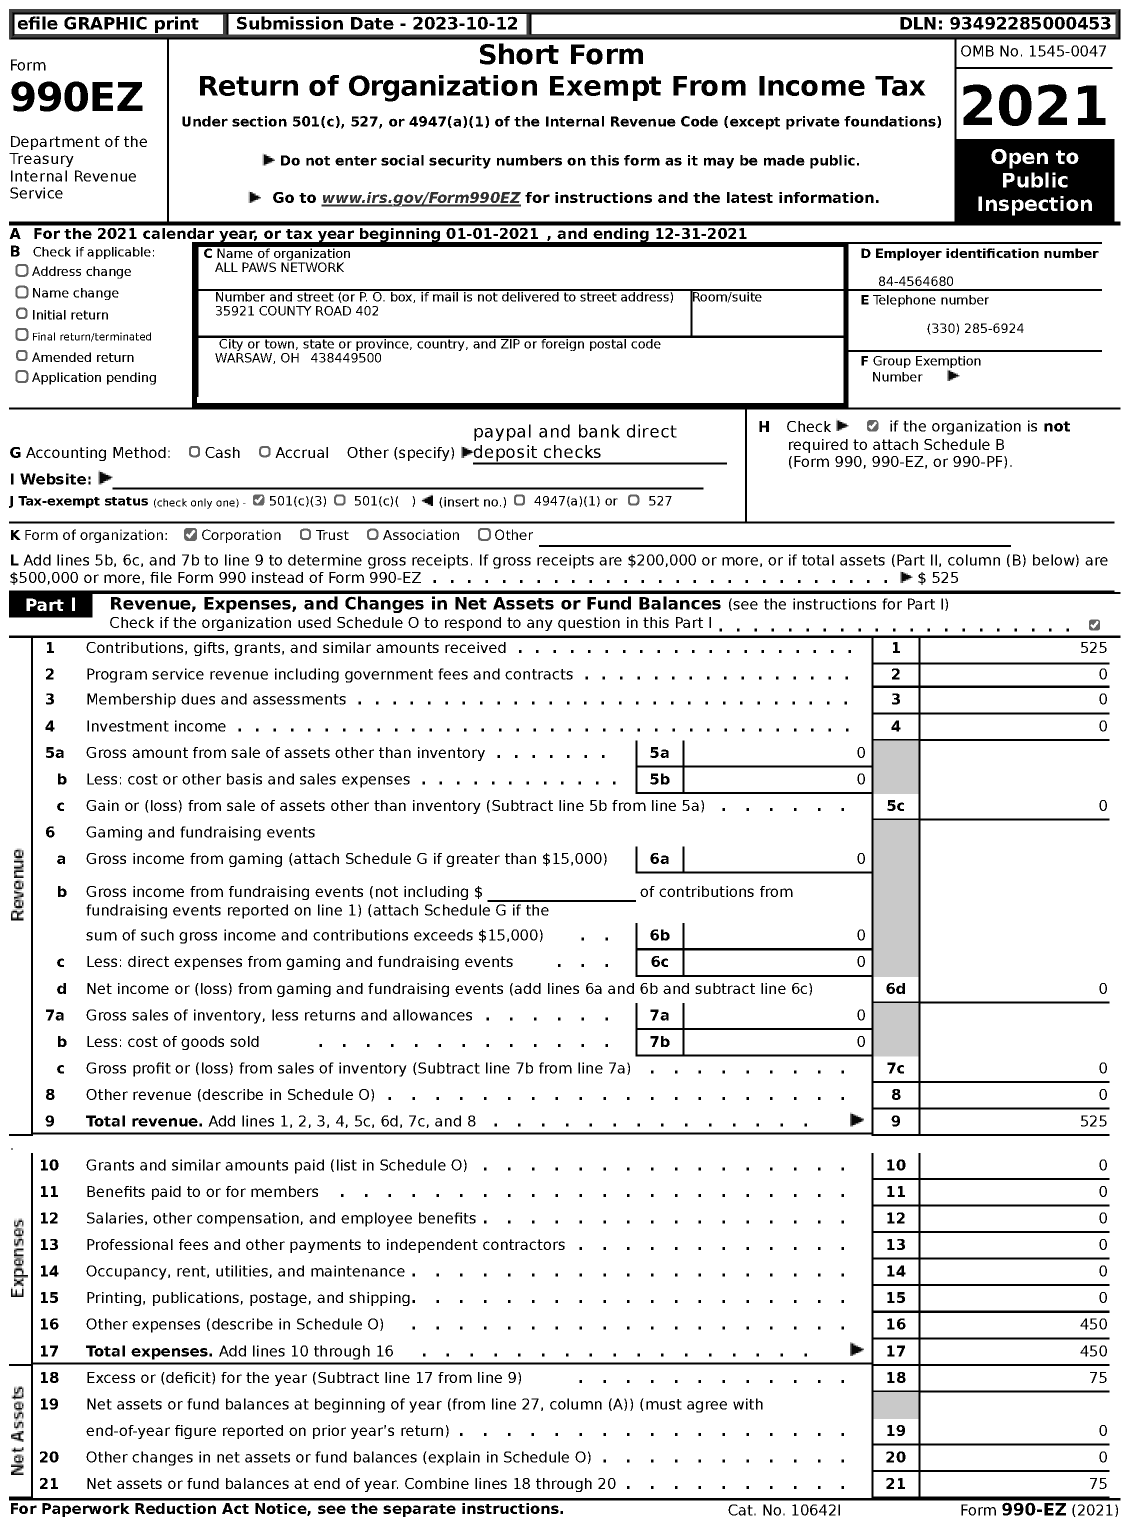 Image of first page of 2021 Form 990EZ for All Paws Network